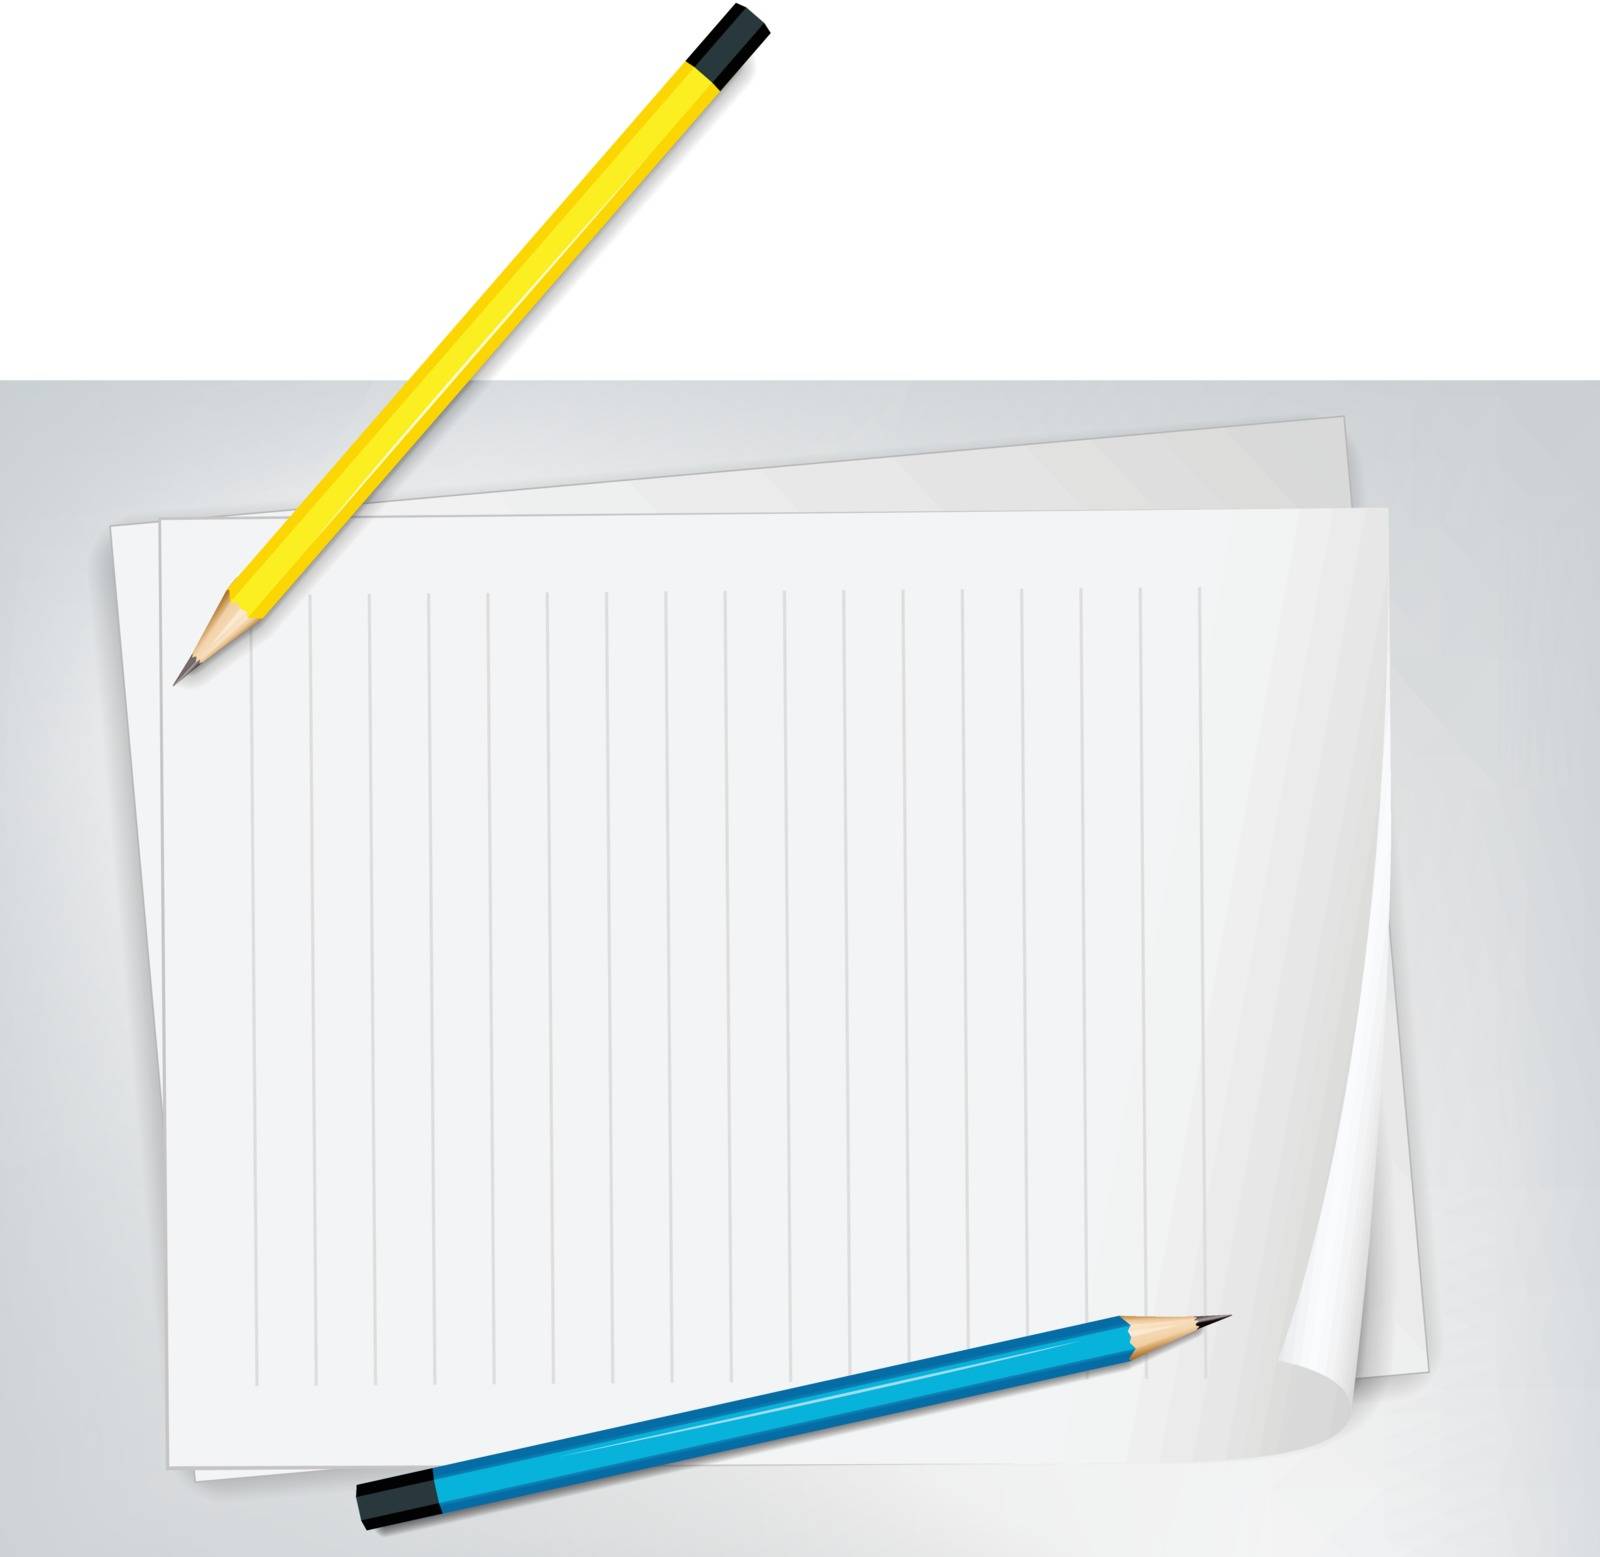 Illustration of paper and pencils